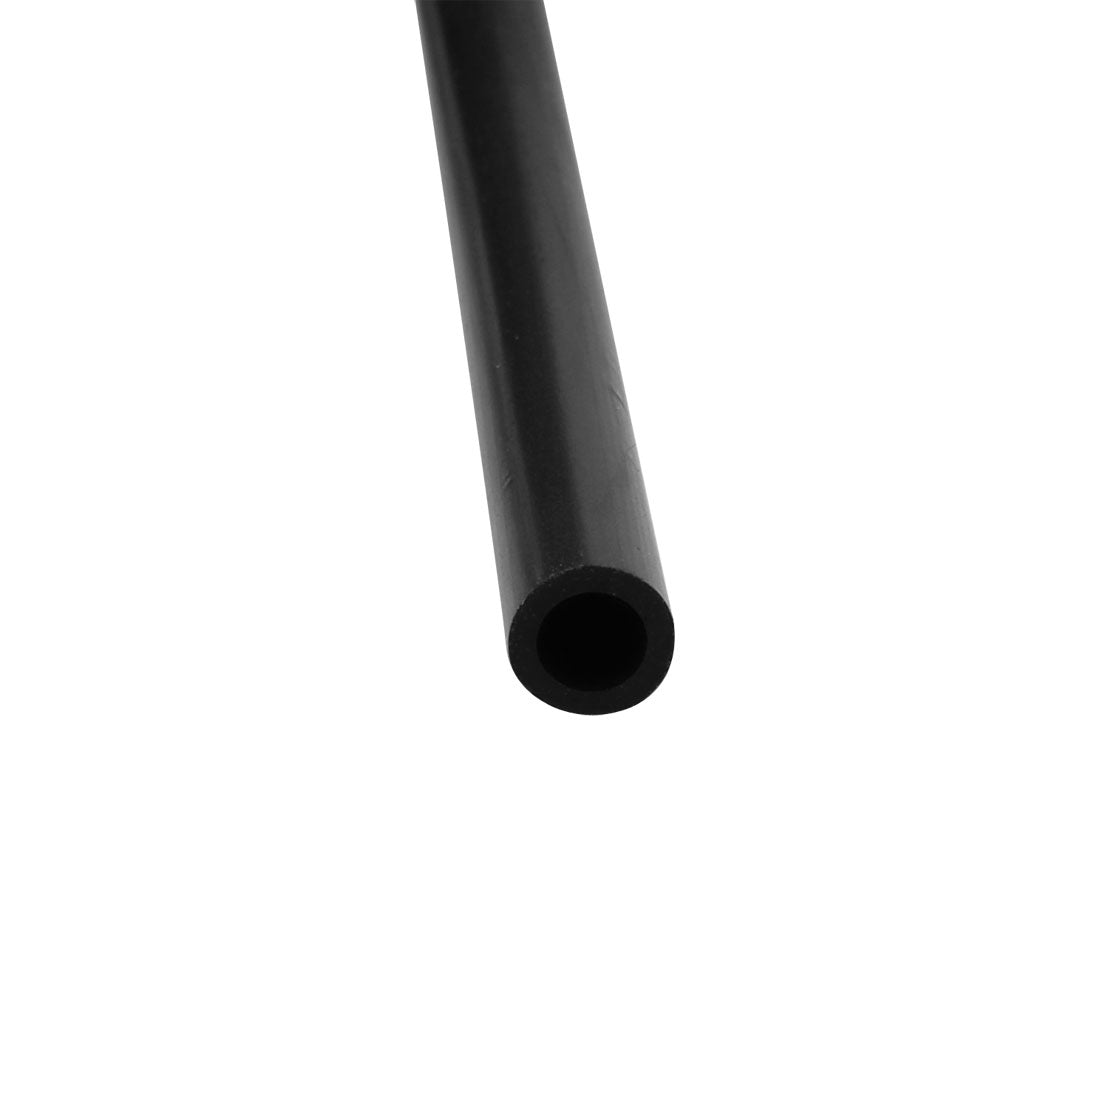 uxcell Uxcell 4mmx6mm Heat-Resistant Silicone Rubber Tube Hose Pipe Black 1M Length